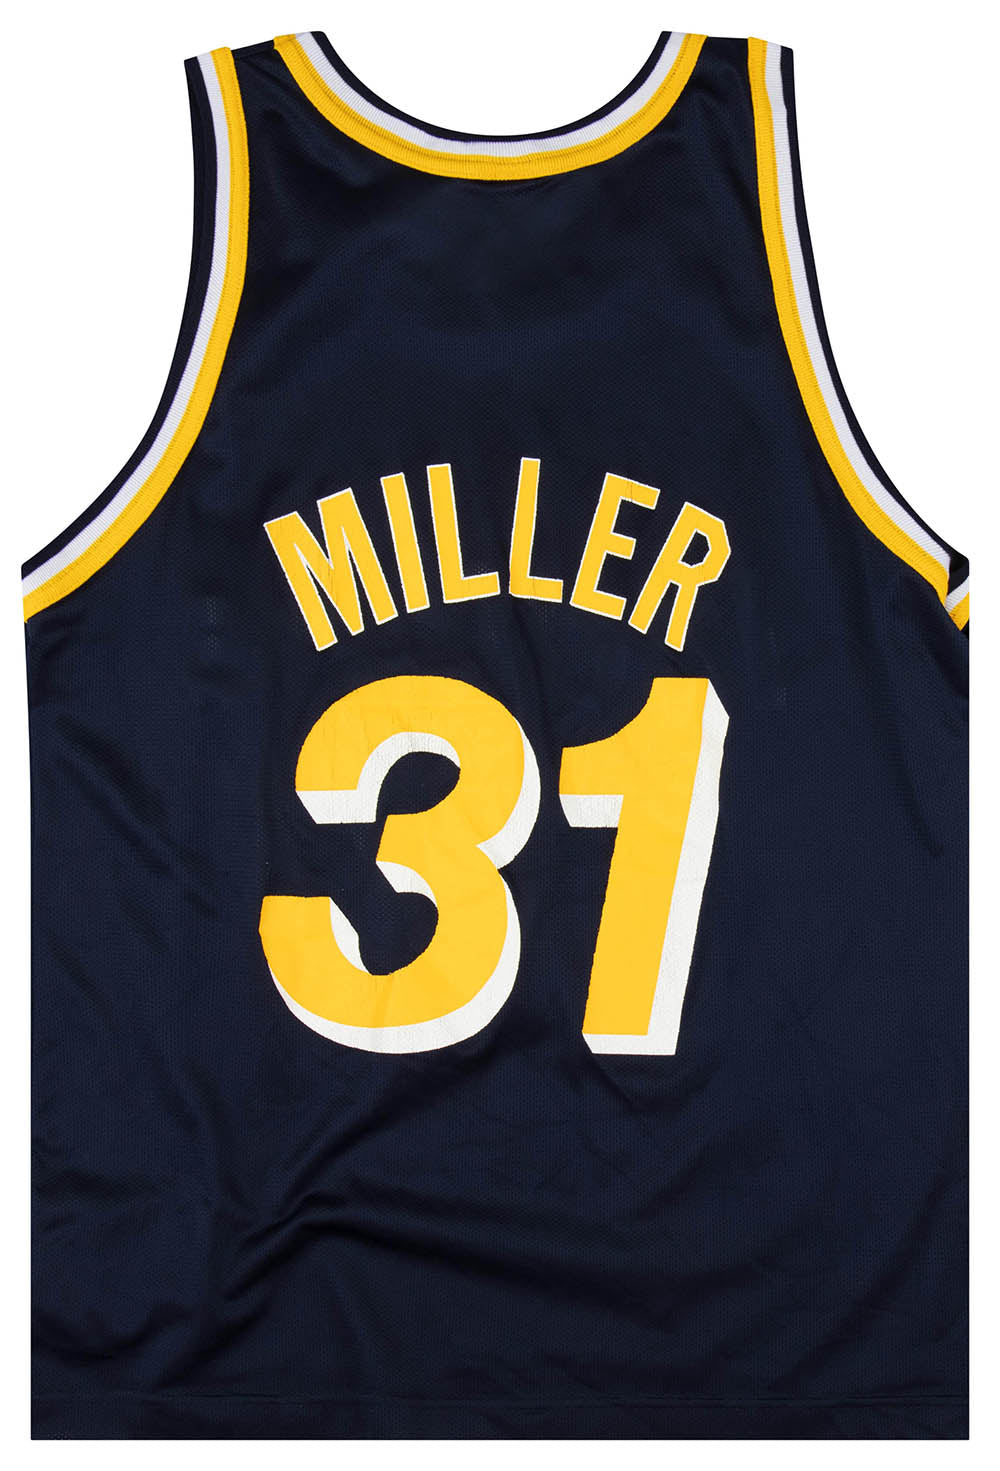 1995-97 INDIANA PACERS MILLER #31 CHAMPION JERSEY (AWAY) XL